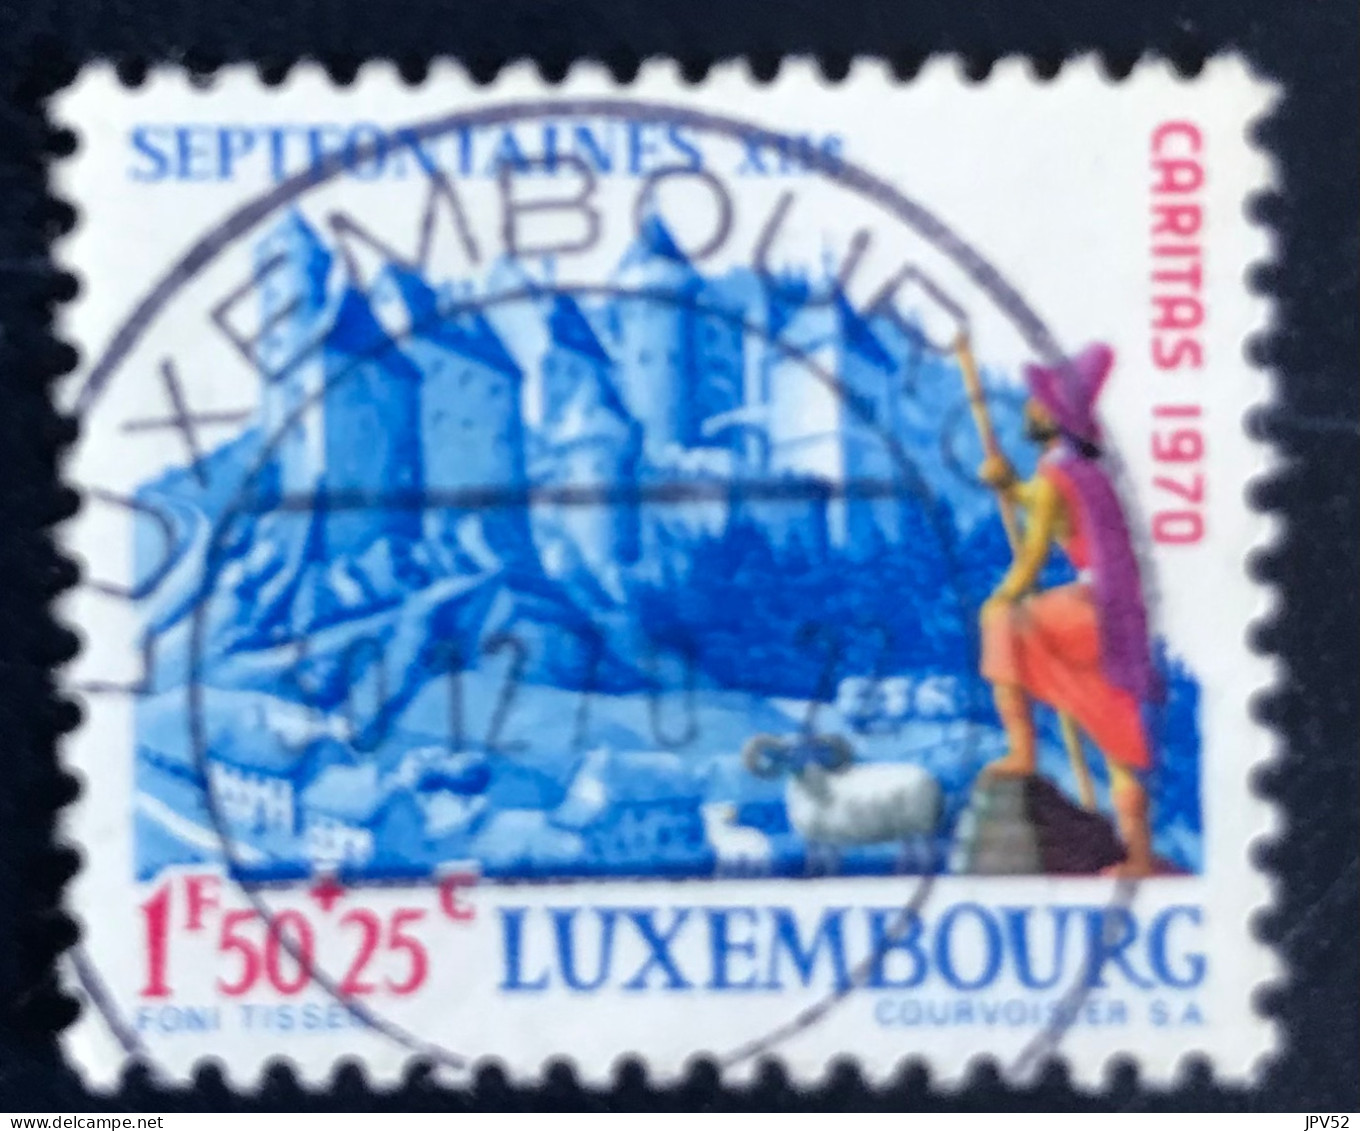 Luxembourg - Luxemburg - C18/34 - 1970 - (°)used - Michel 815 - Burcht Van Septfontaines - LUXEMBOURG - Oblitérés